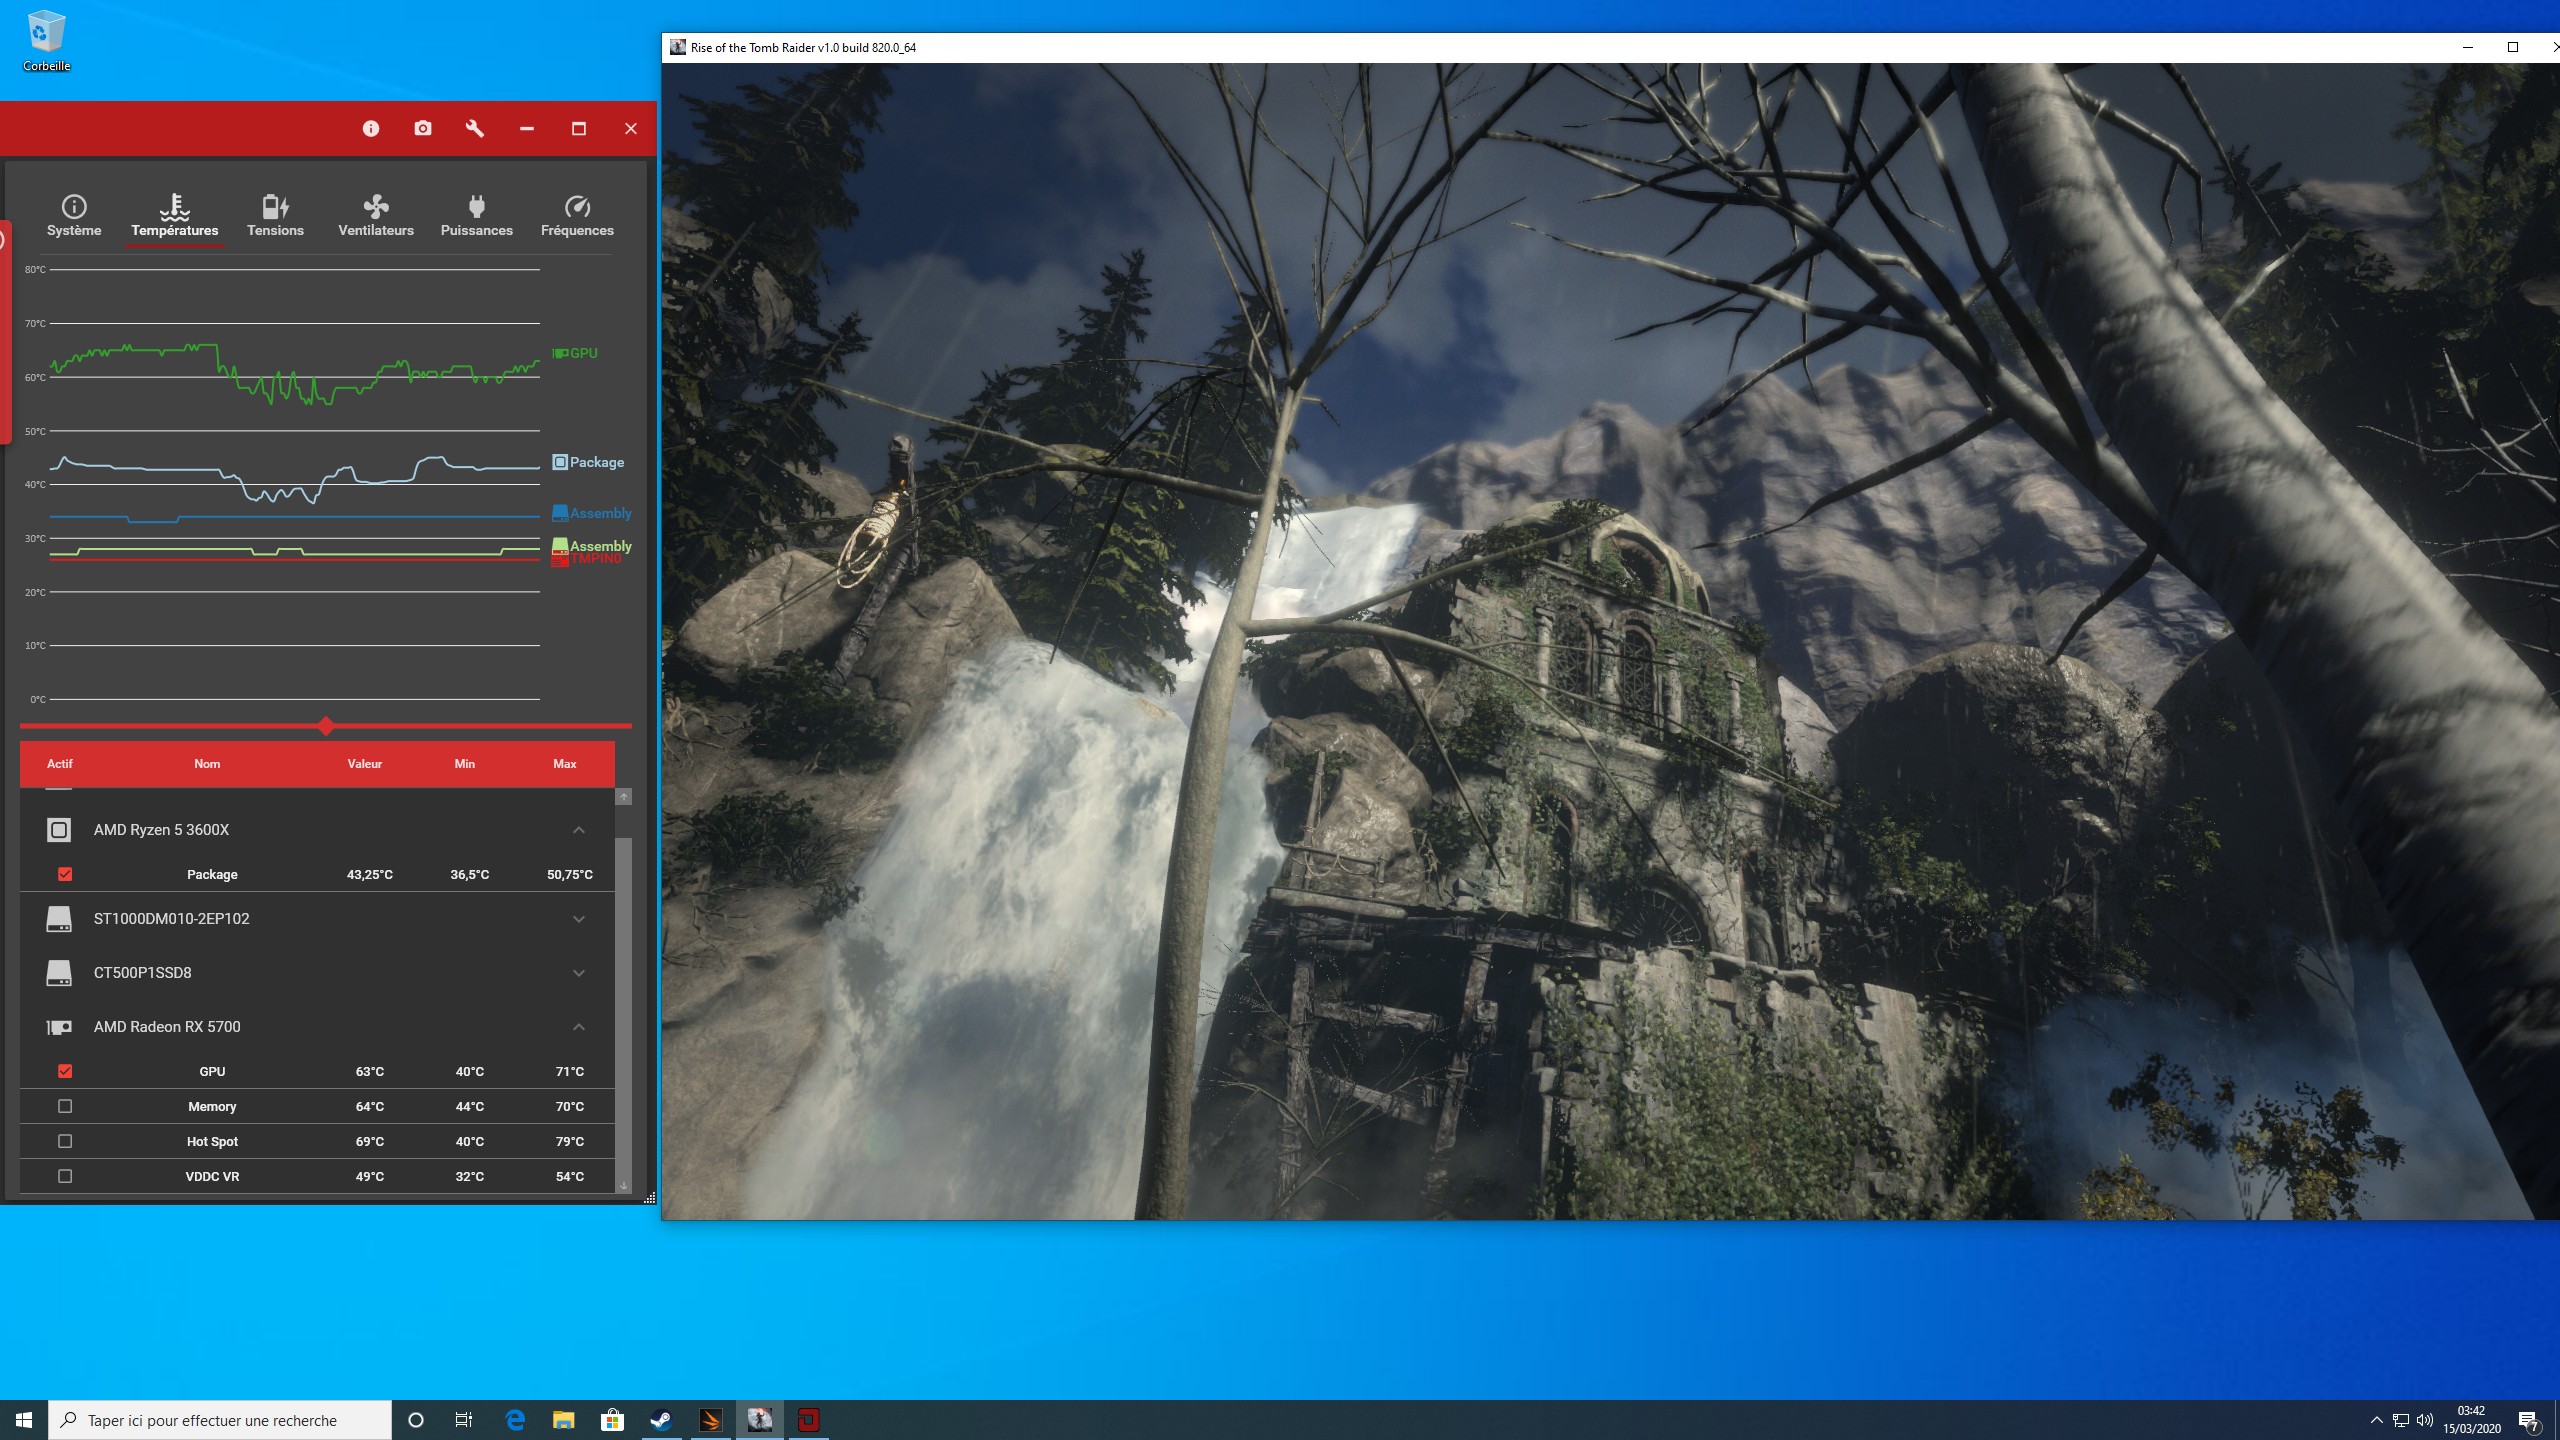 Rise of the Tomb Raider v1.0 build 820.0 66